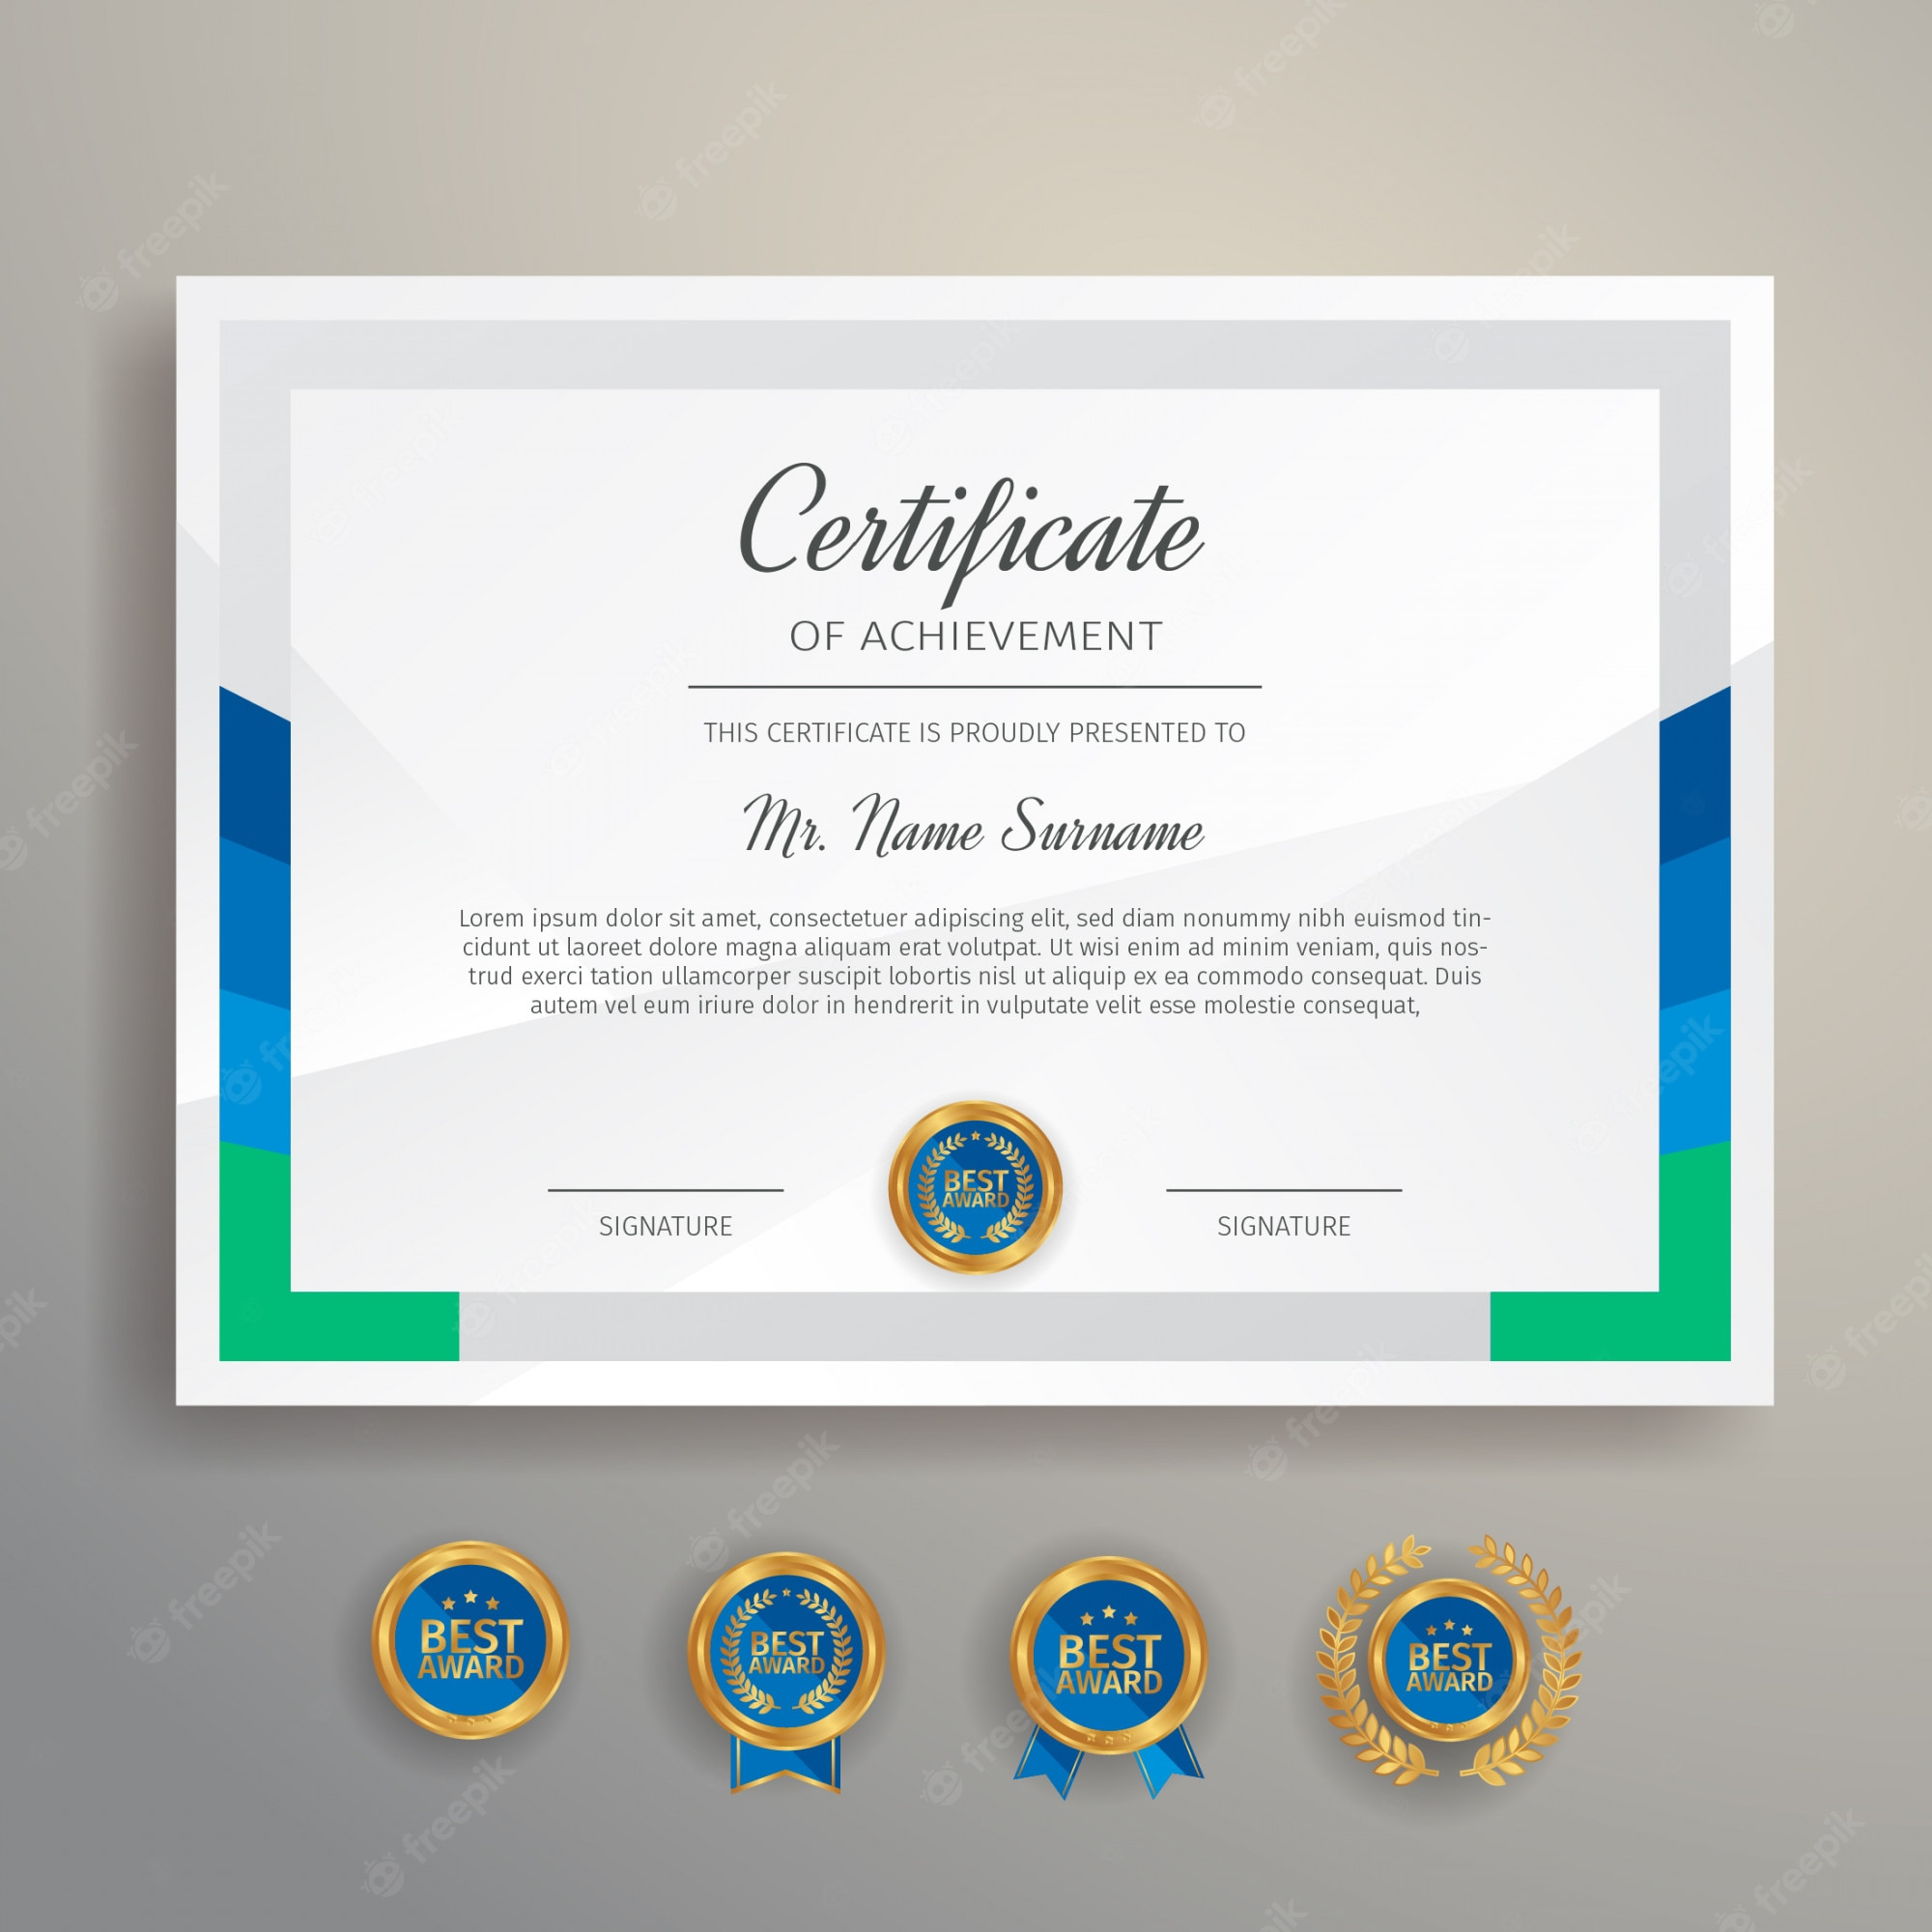 Education certificate Images  Free Vectors, Stock Photos & PSD In Certificate Templates For School